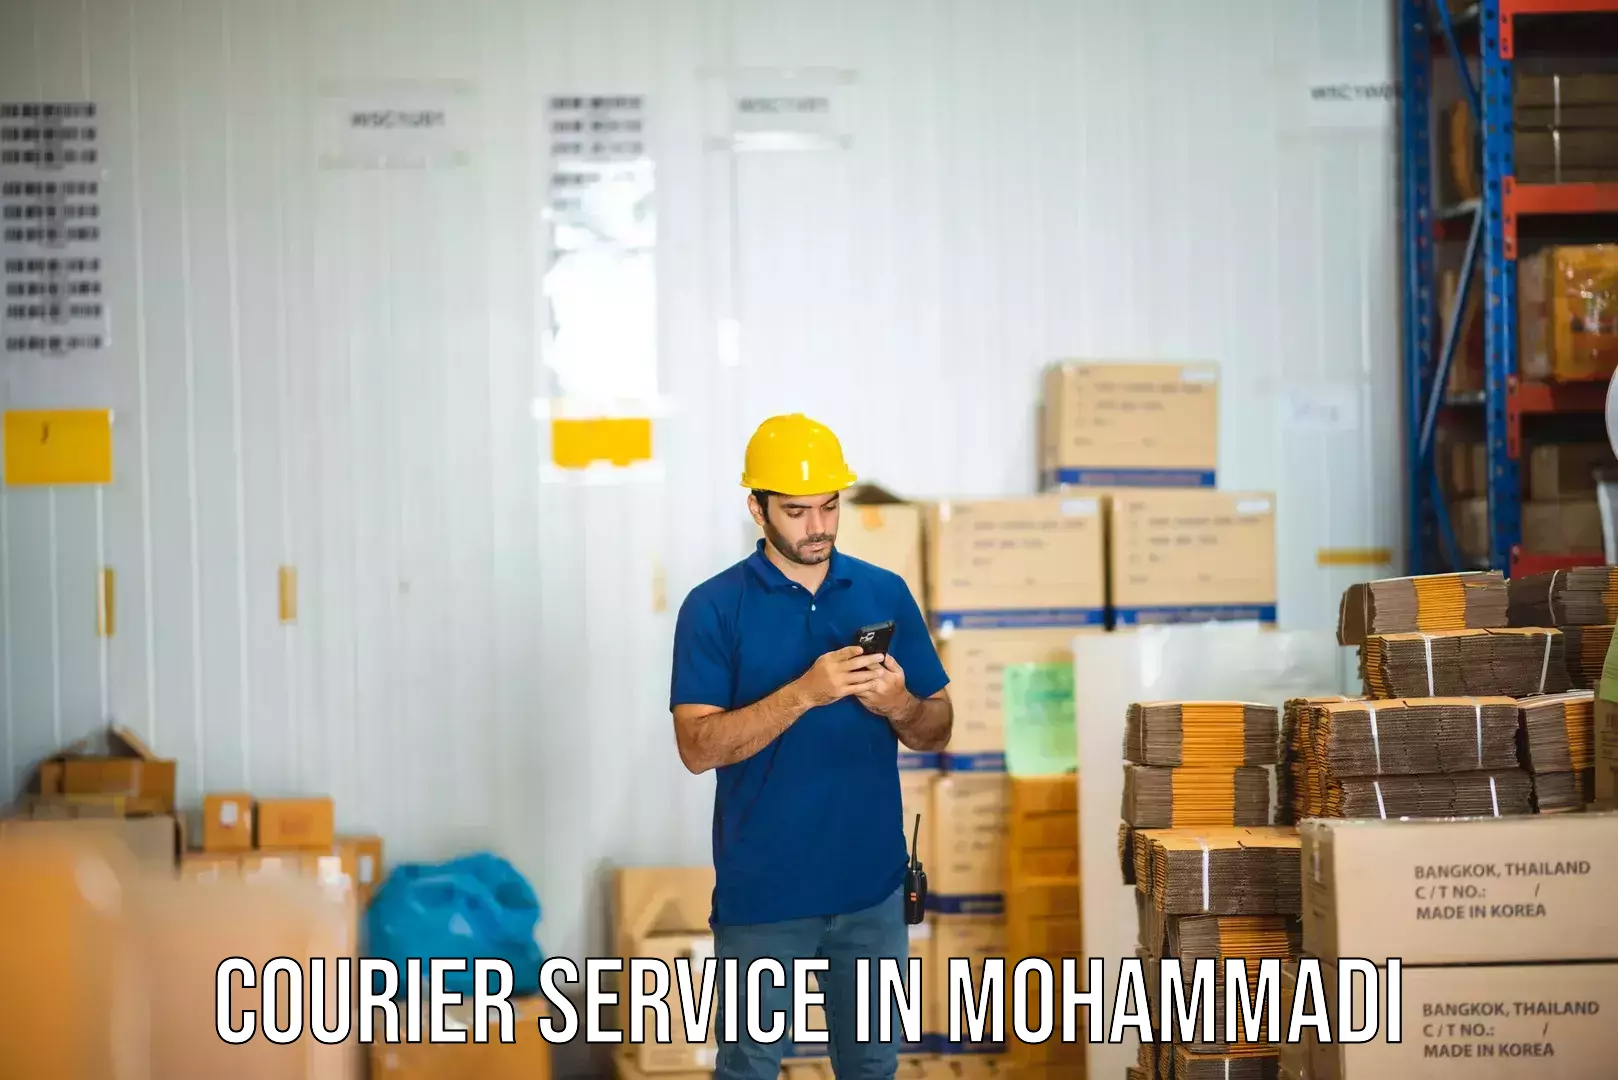 On-demand delivery in Mohammadi